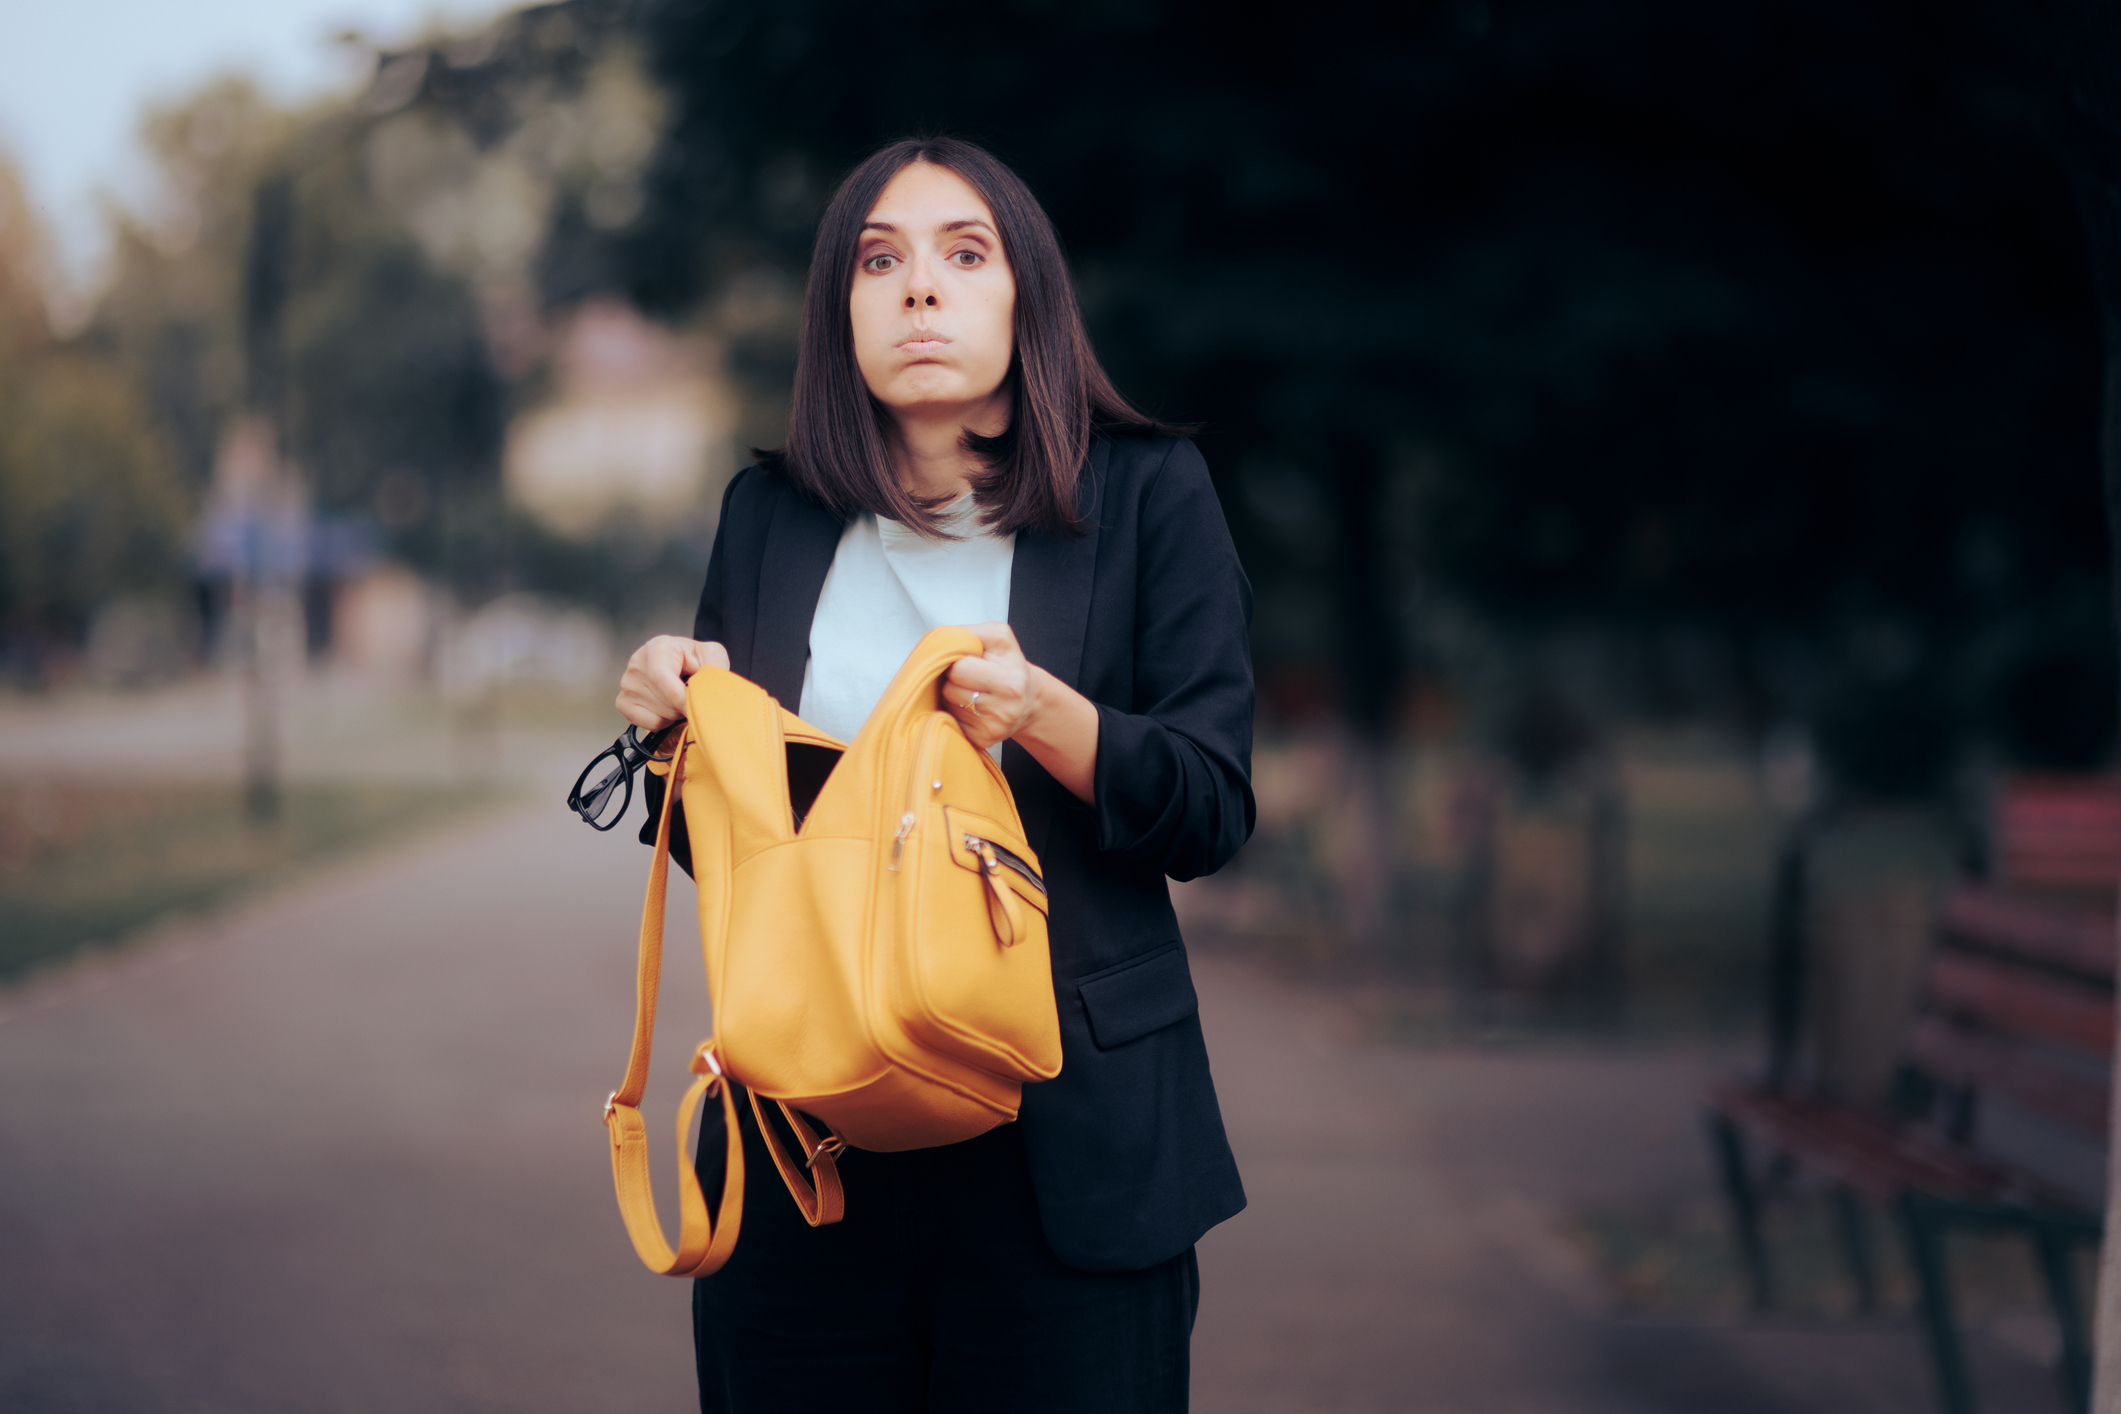 Woman in a blazer holding a yellow bag looking surprised on a street